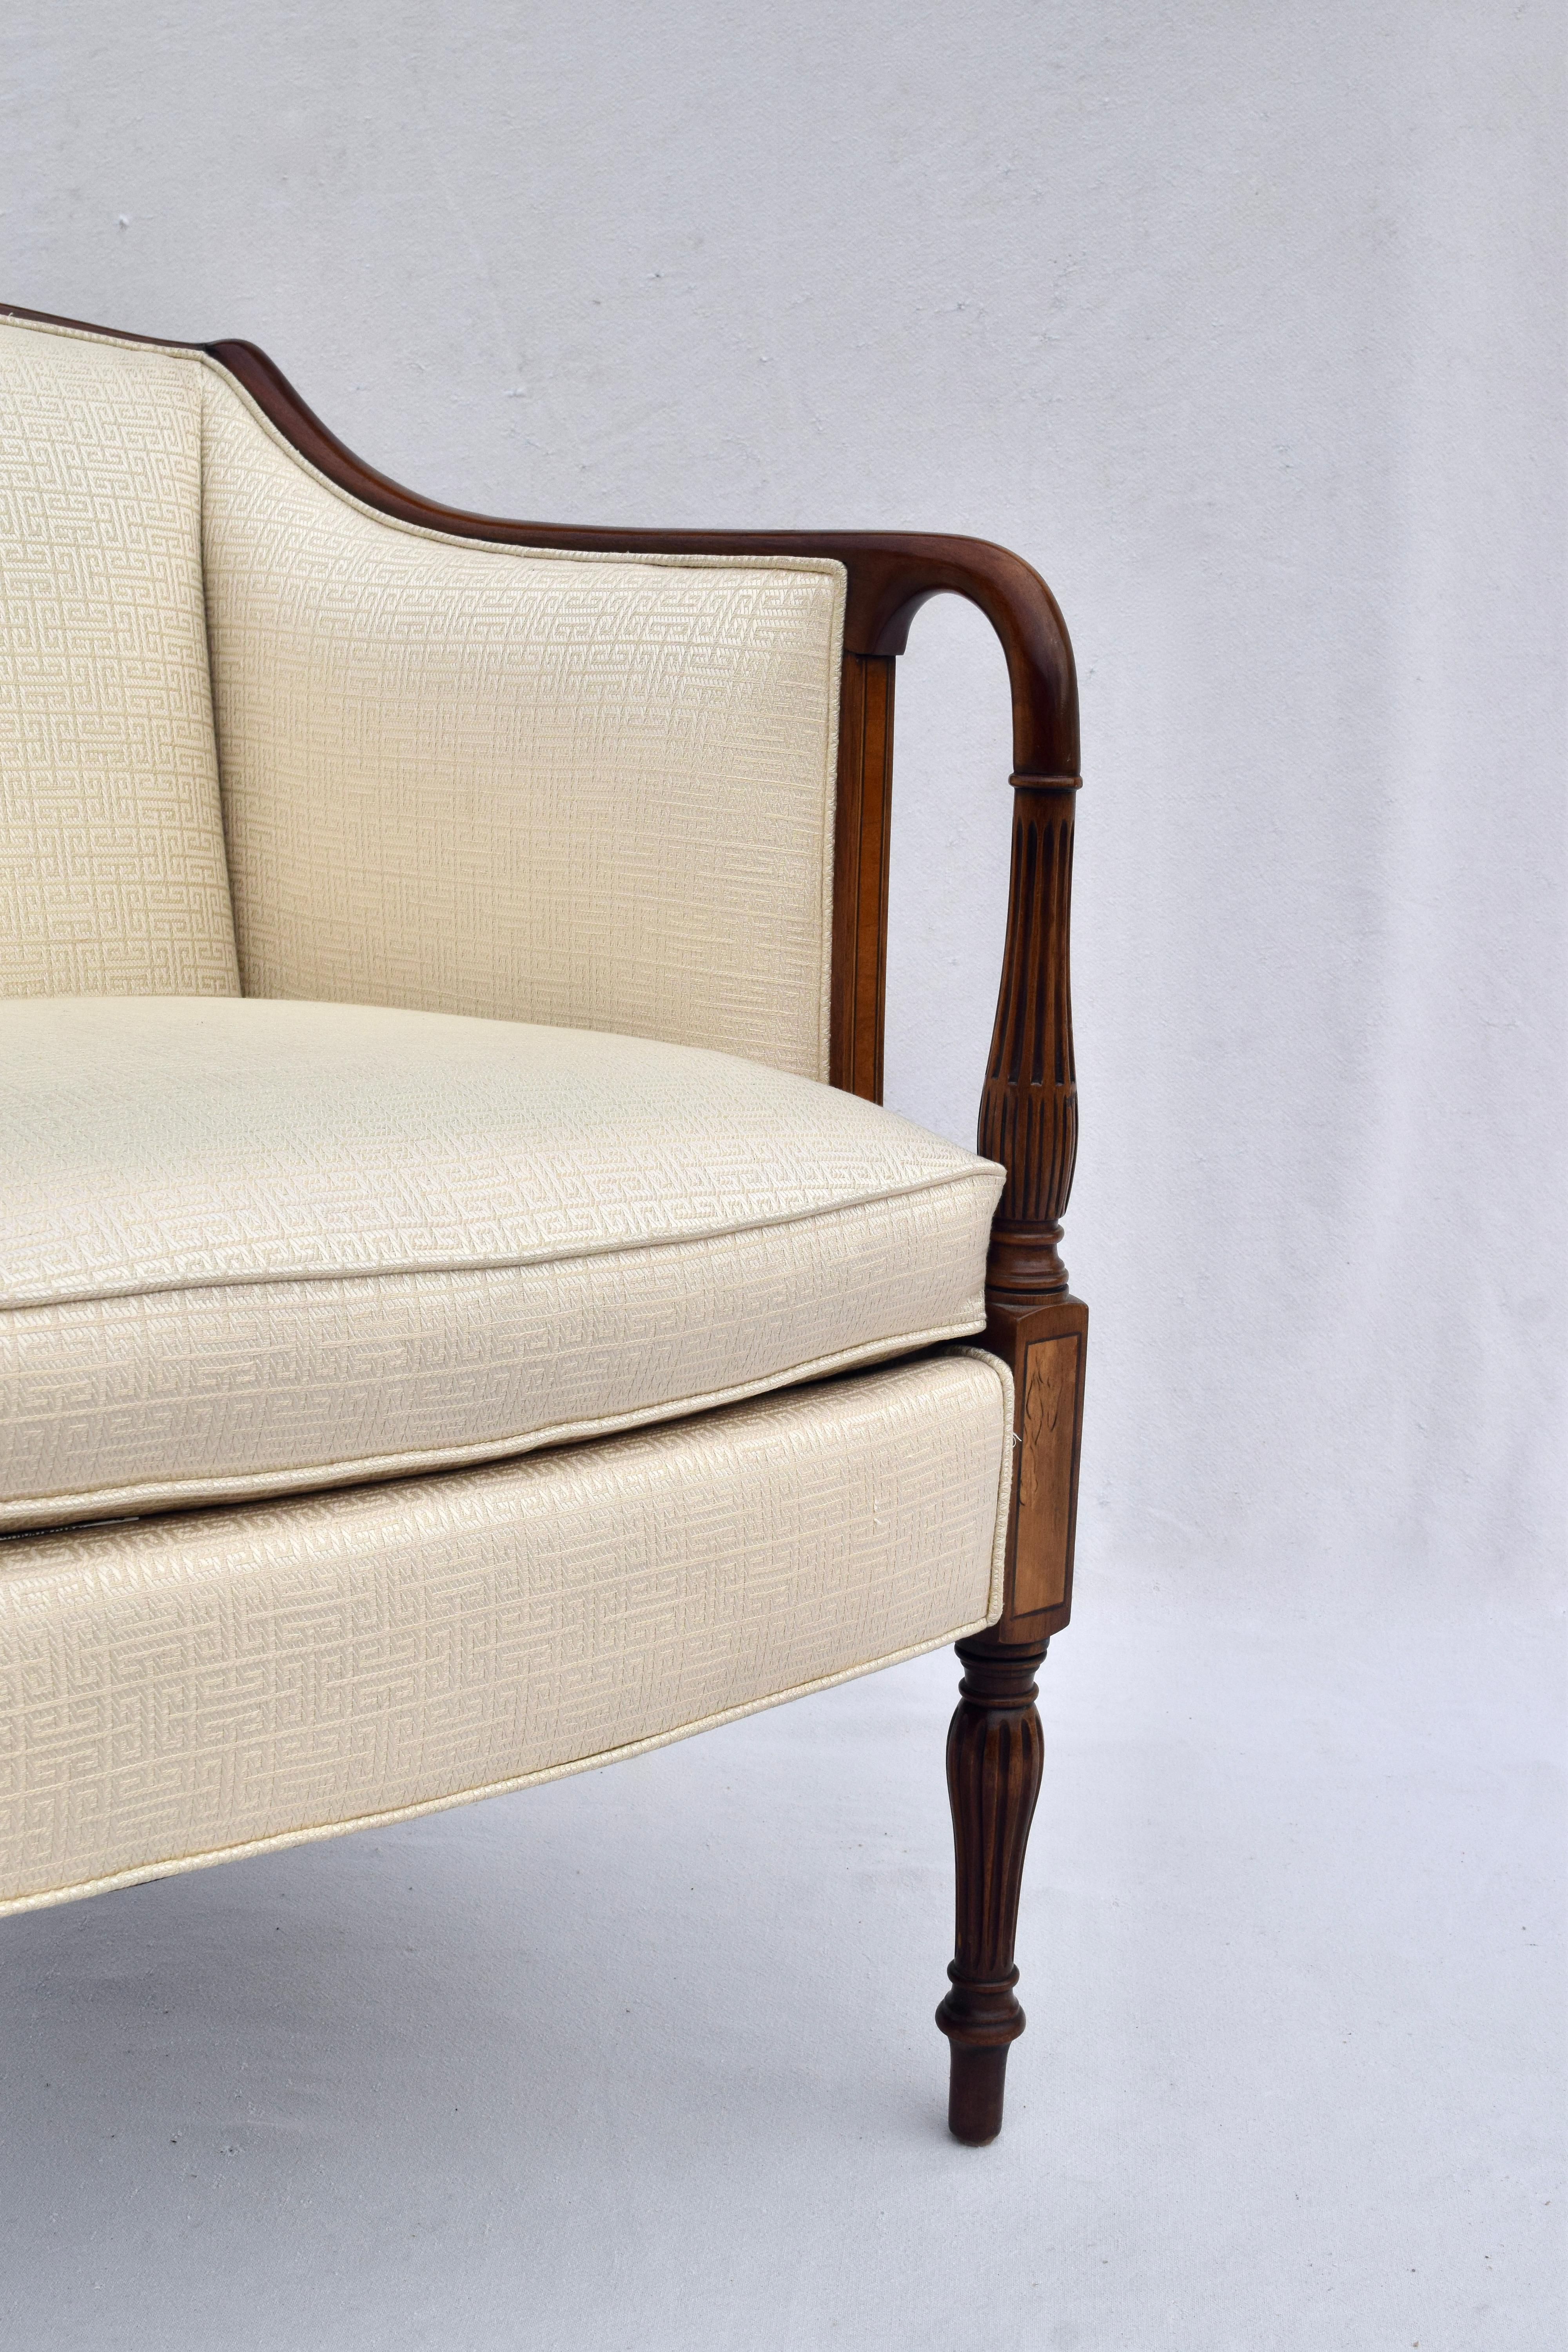 Sheraton Federal Style Upholstered Inlaid Club Chairs by Southwood Hickory, NC 1